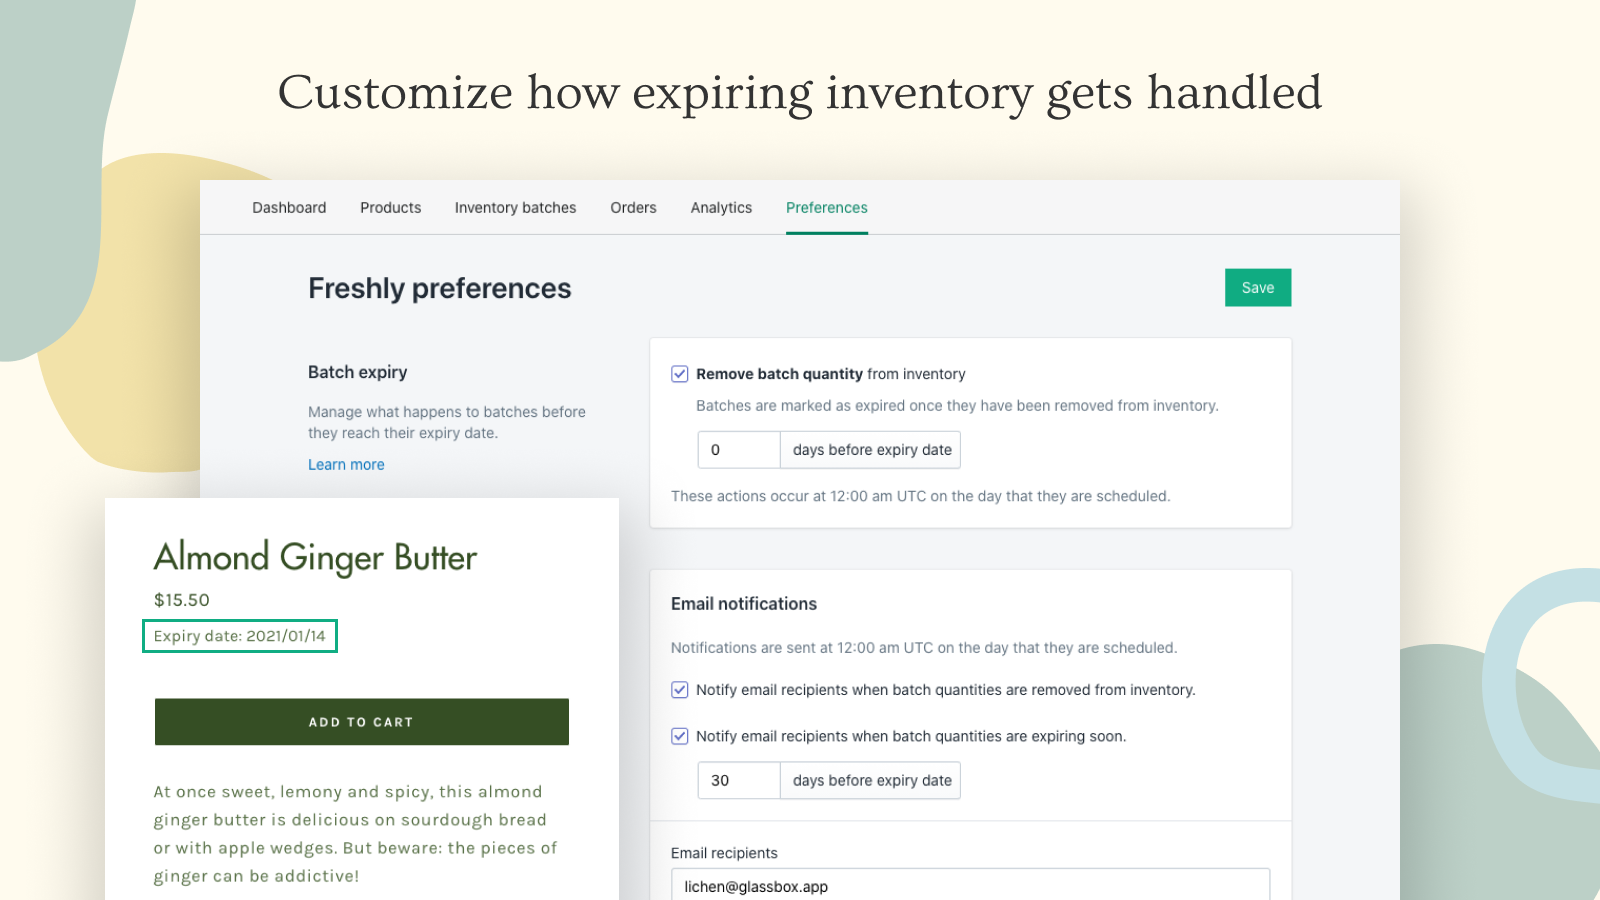 Customize how expiring inventory gets handled